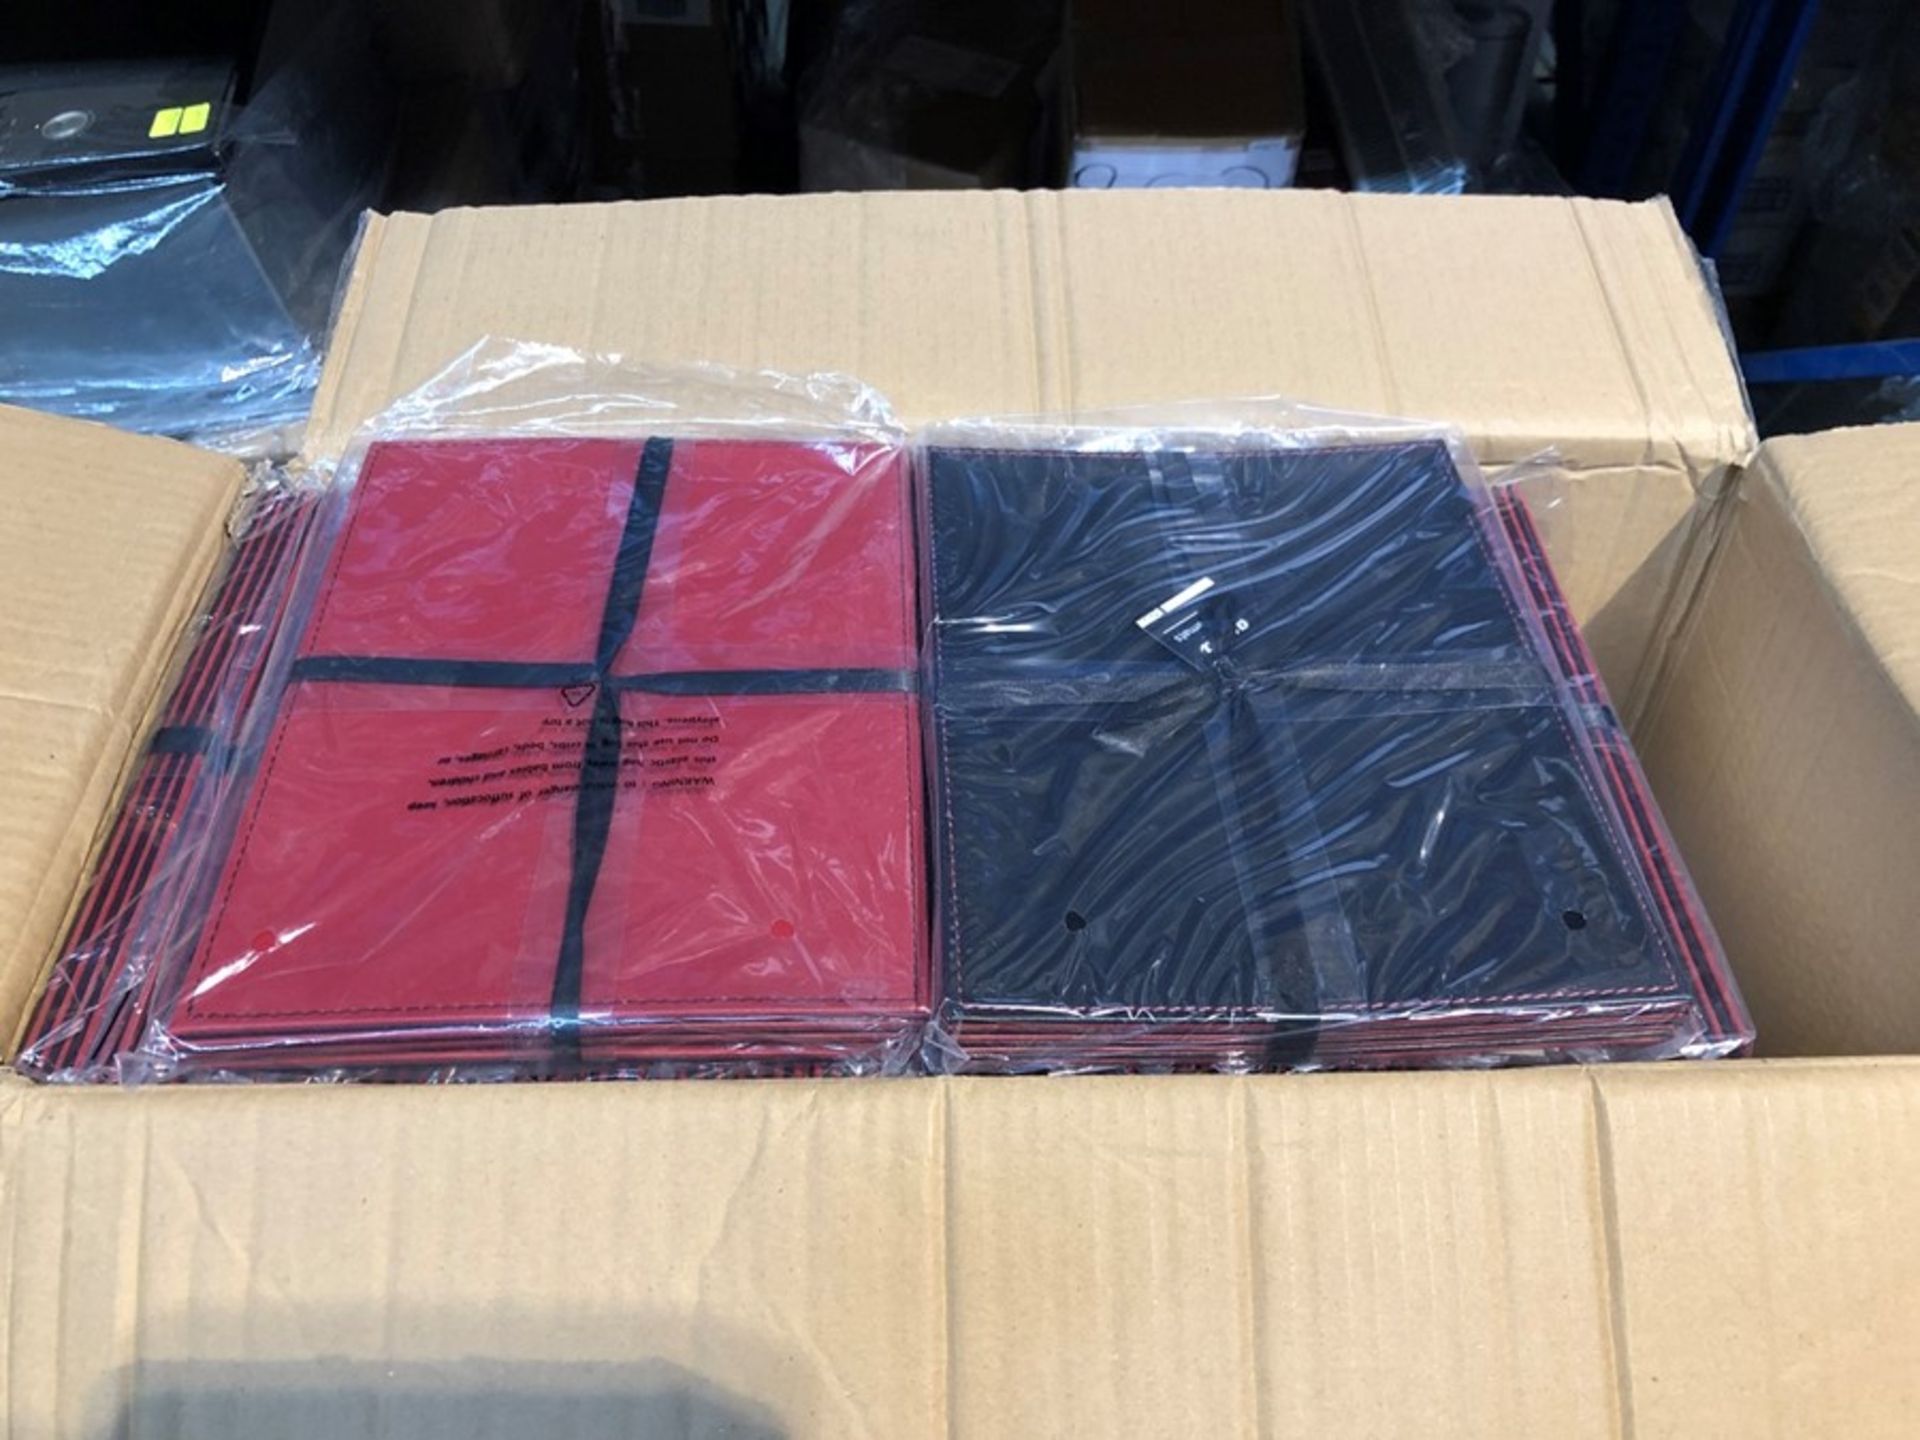 1 LOT TO CONTAIN 18 PLACEMATS / RRP £107.82 (PUBLIC VIEWING AVAILABLE)